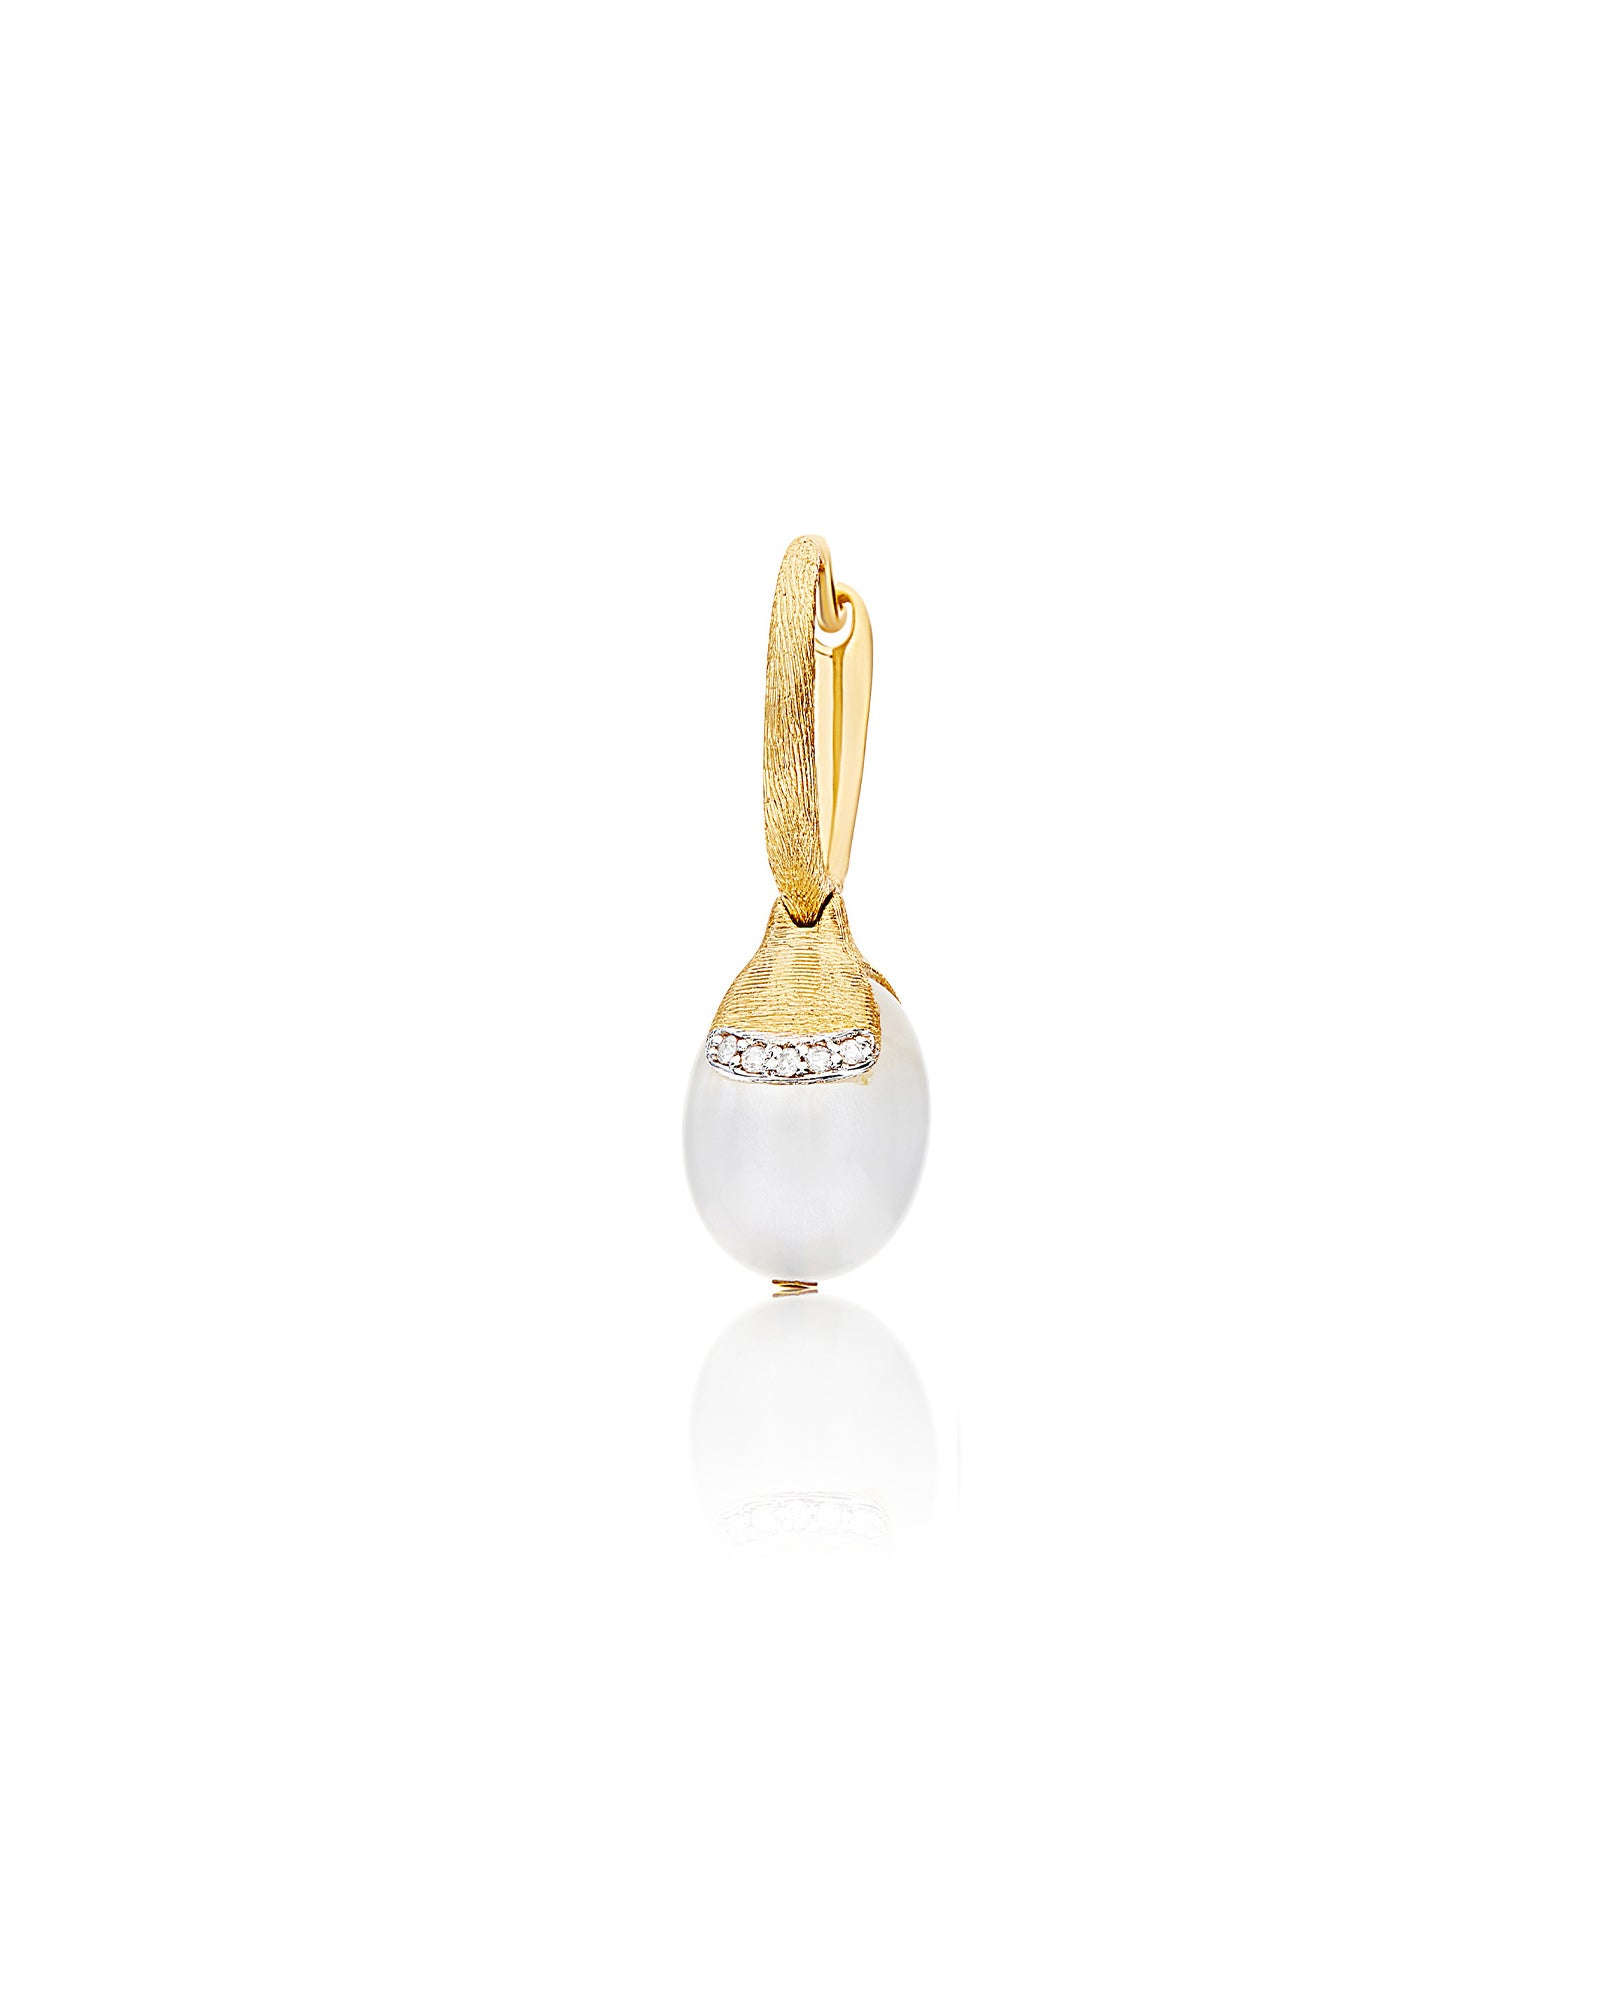 Nanis WHITE DESERT "AMULETS" CILIEGINE GOLD AND WHITE MOONSTONE BALL DROP EARRINGS WITH DIAMONDS DETAILS (SMALL) OS7-603